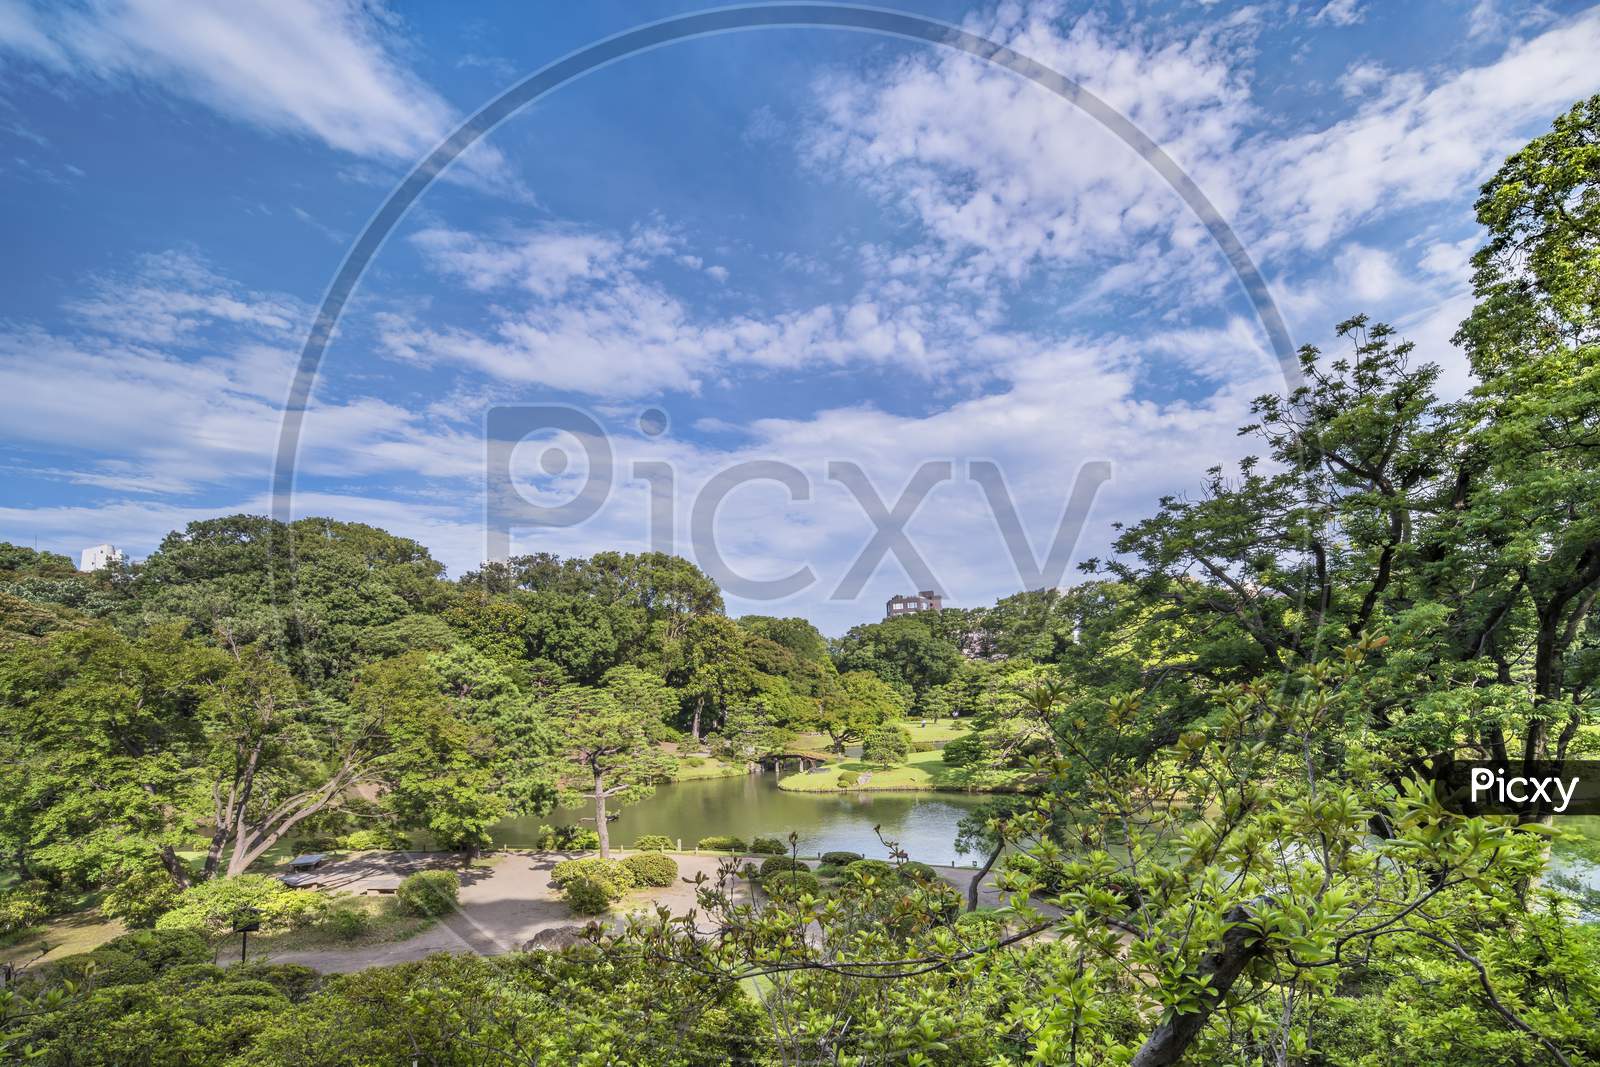 Lake Surrounded By Pines, Maple And Cherry Trees Under The Blue Sky In The Garden Of Rikugien In Tokyo In Japan.